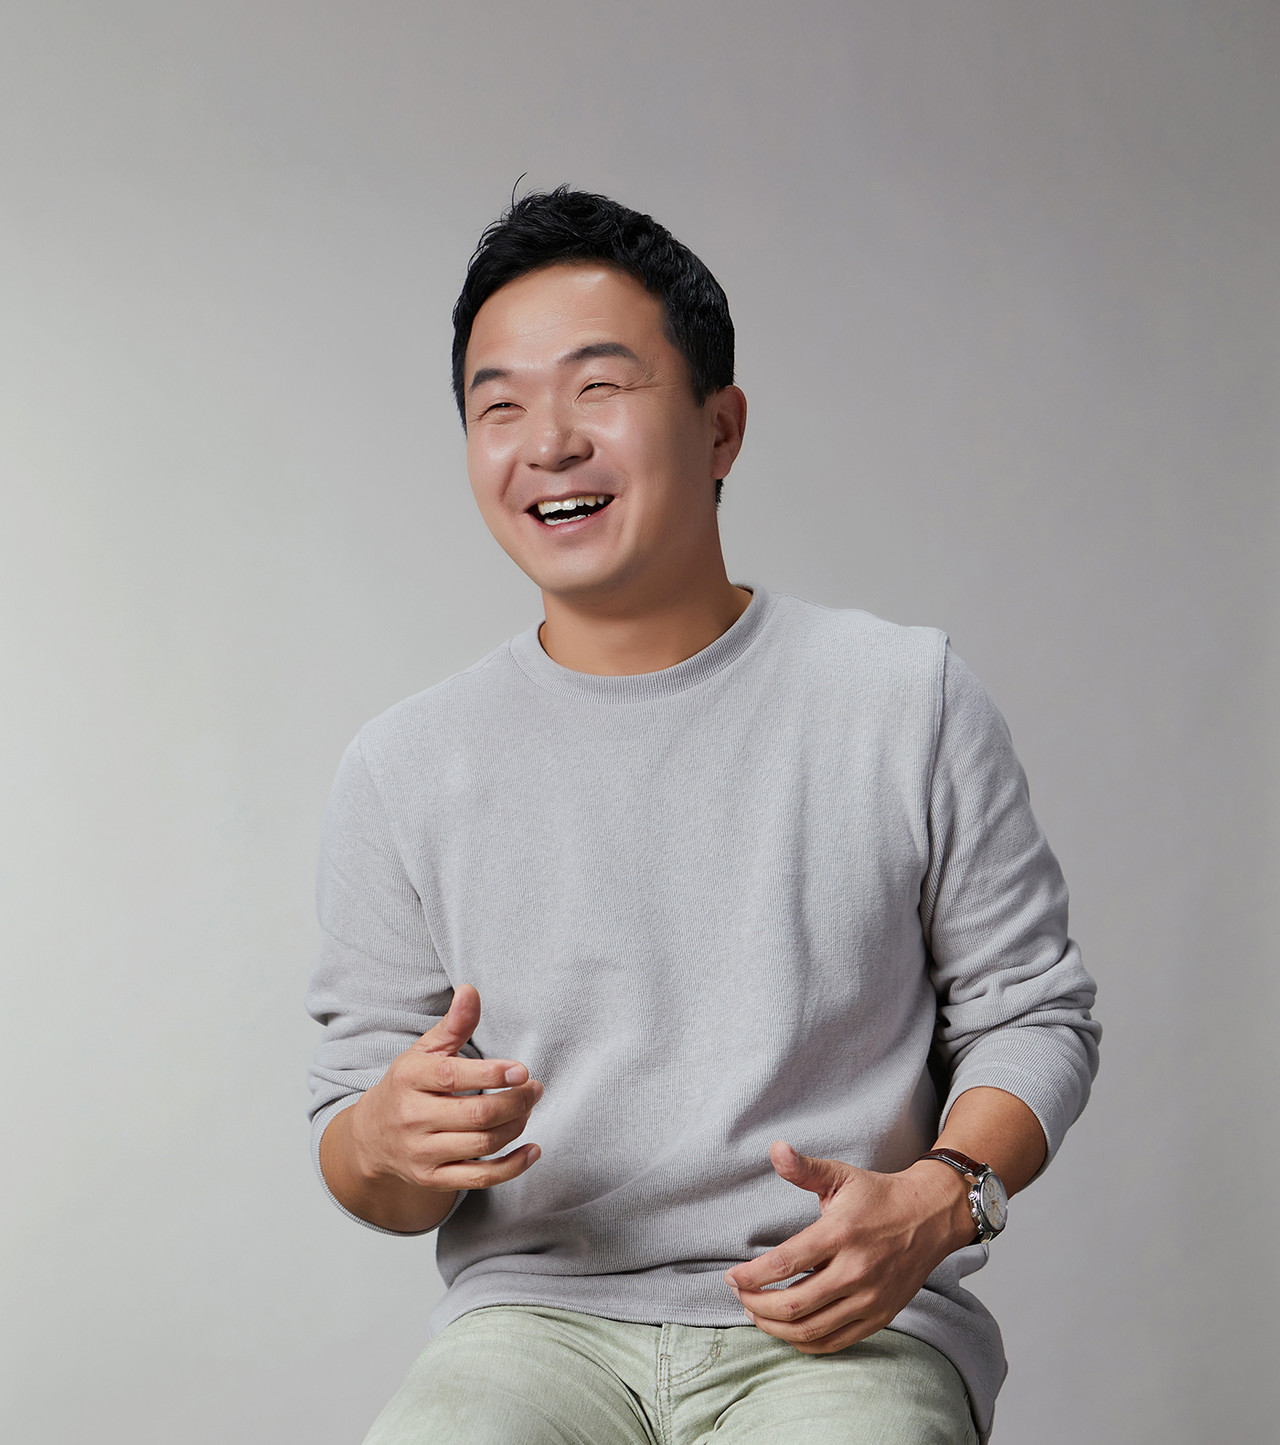 <div style="margin: 10px; line-height:1.8;"><strong>CEO</strong></br>Bae young Myung / Carlton</div>